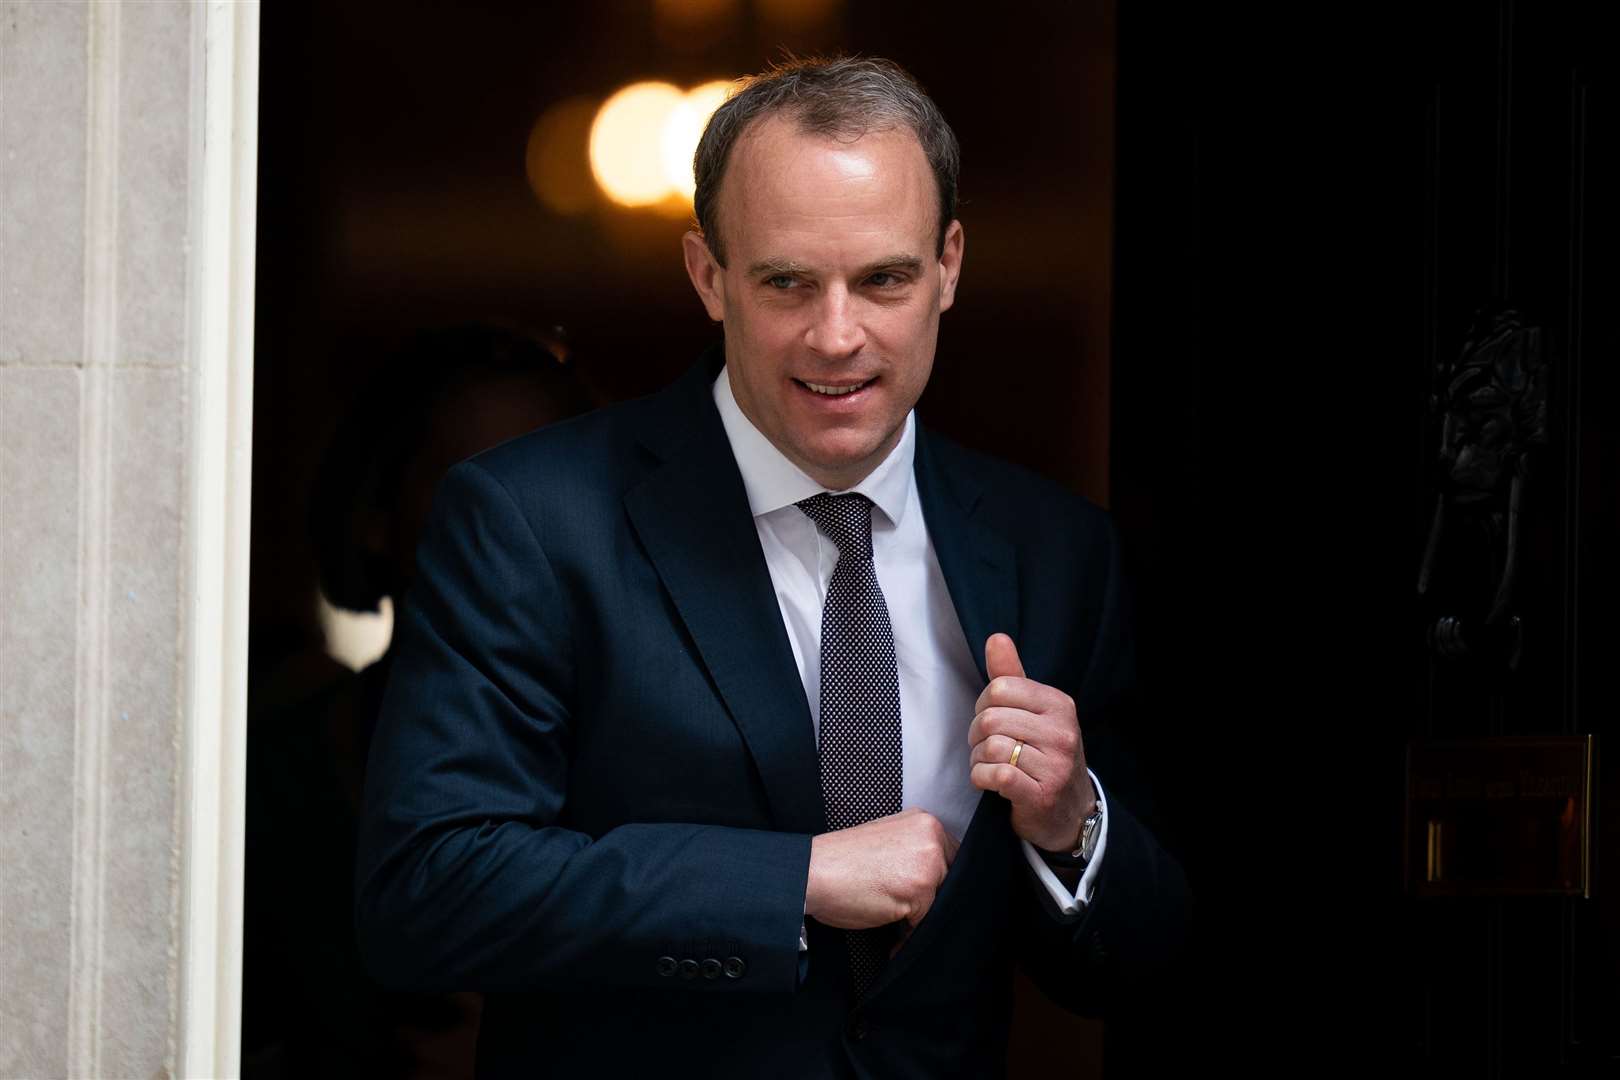 Foreign Secretary Dominic Raab said the views expressed by the French president were ‘offensive’ (Aaron Chown/PA)